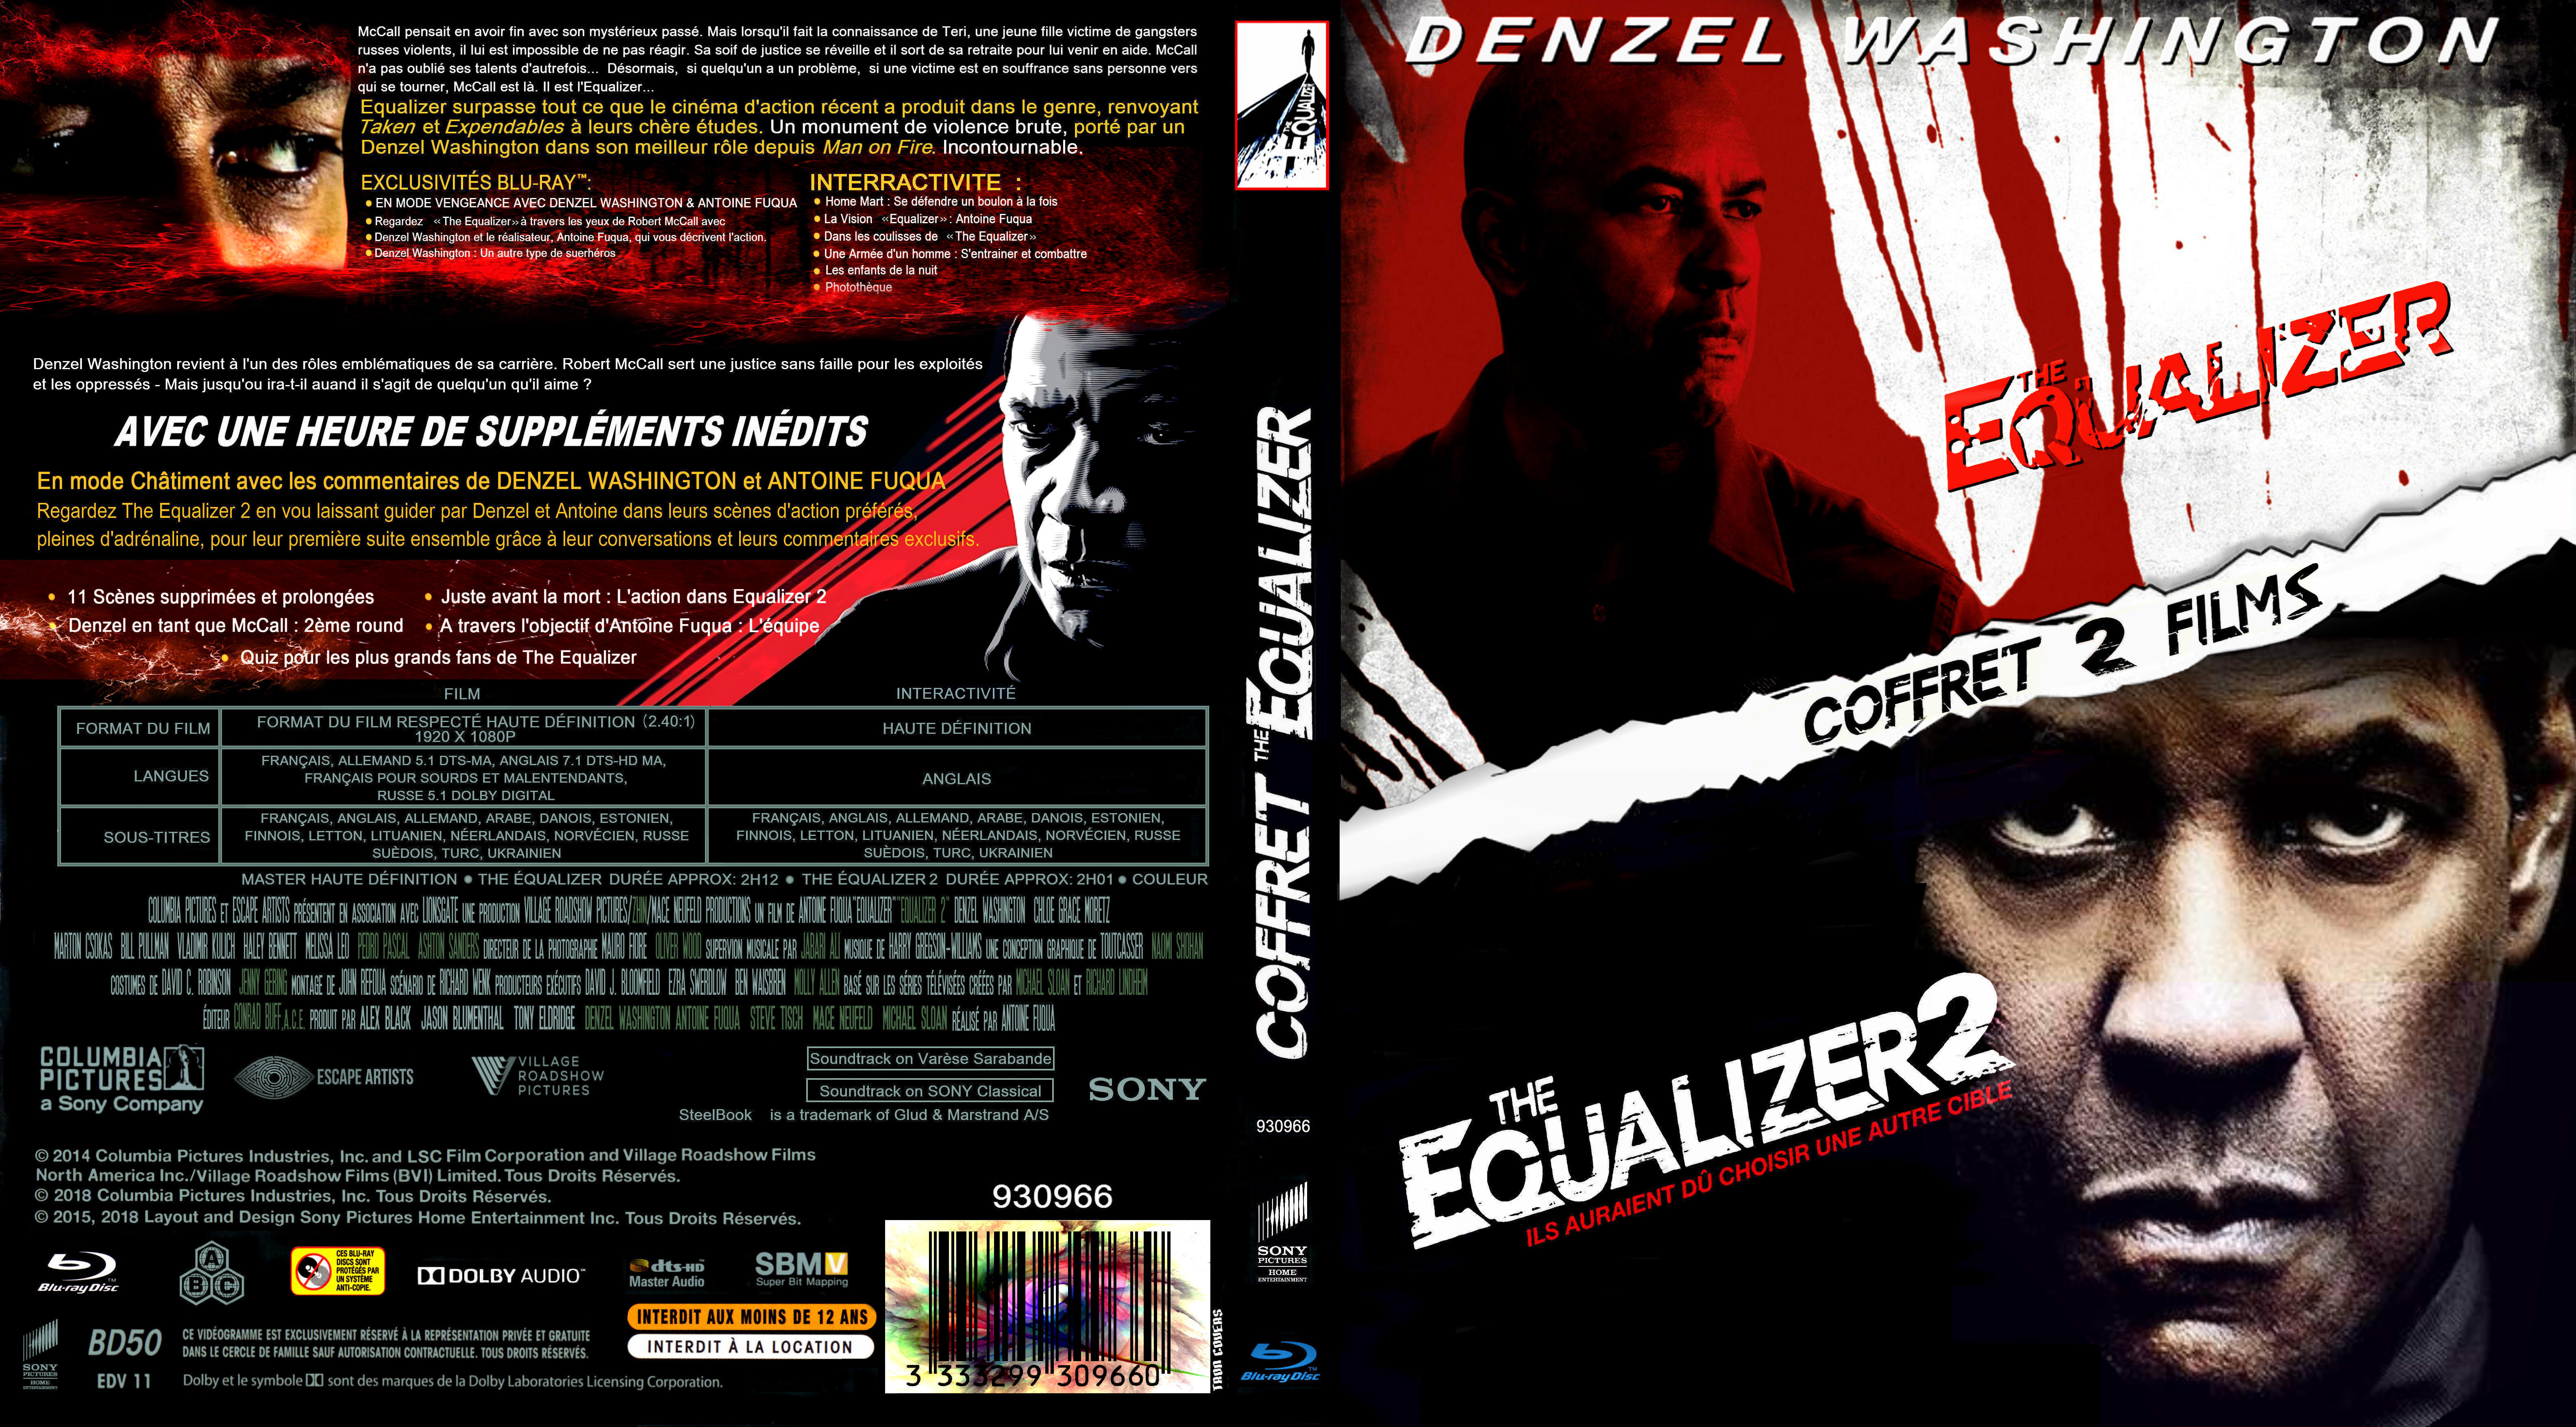 Jaquette DVD The Equalizer coffret custom (BLU-RAY) 